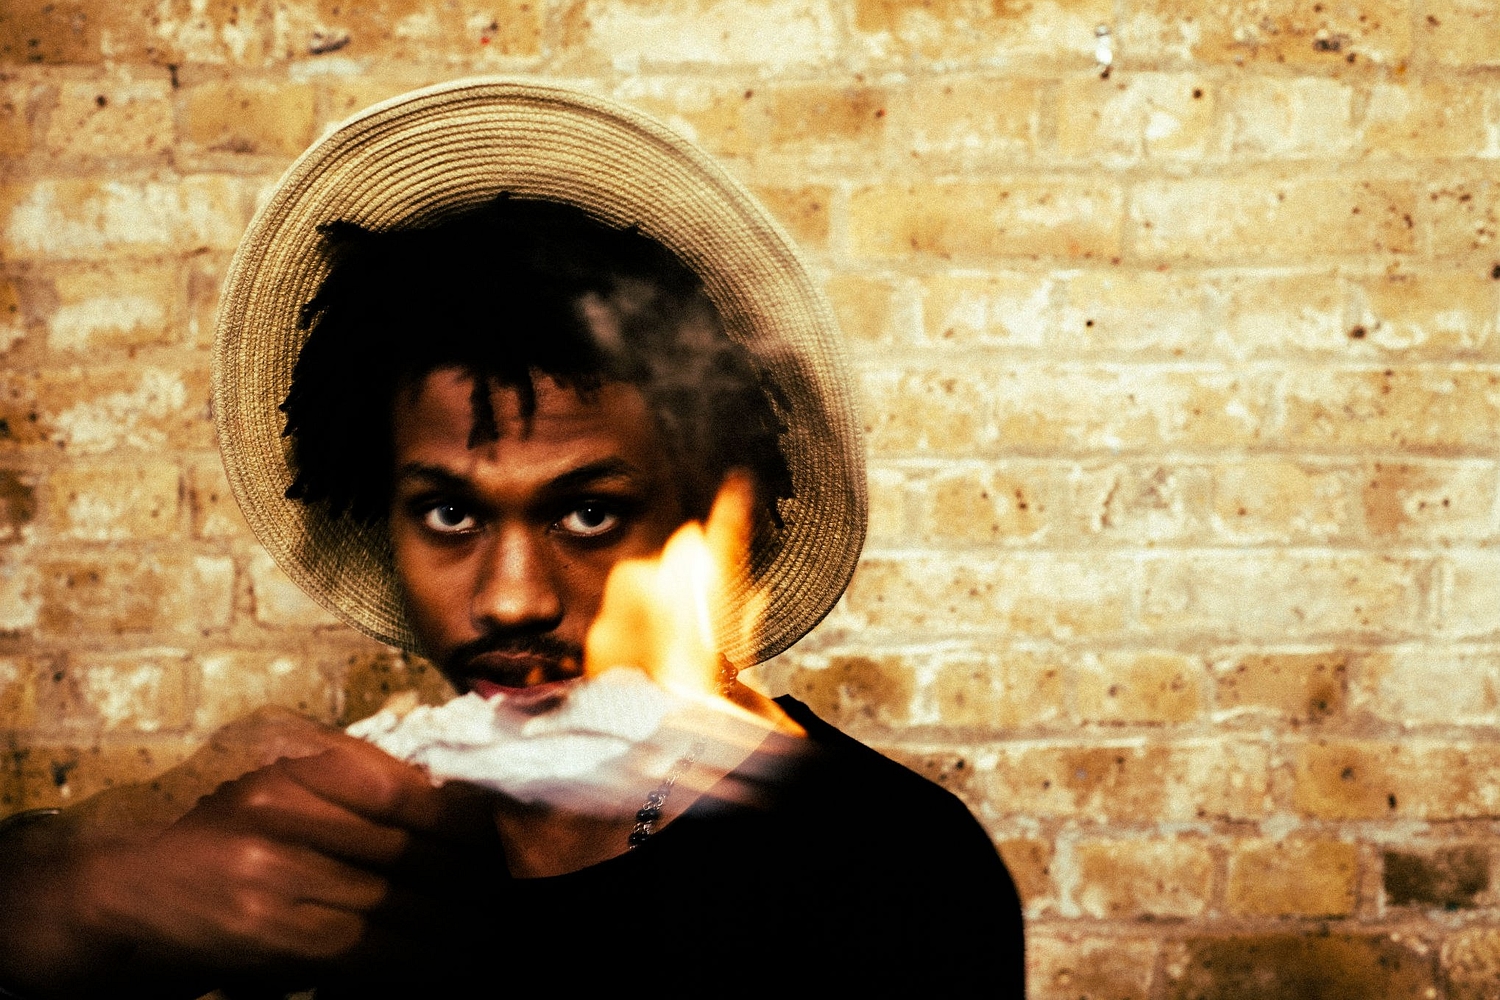 Here’s what’s up - Raury: “I’m a super wildcard, you don’t know what I’m gonna make next”